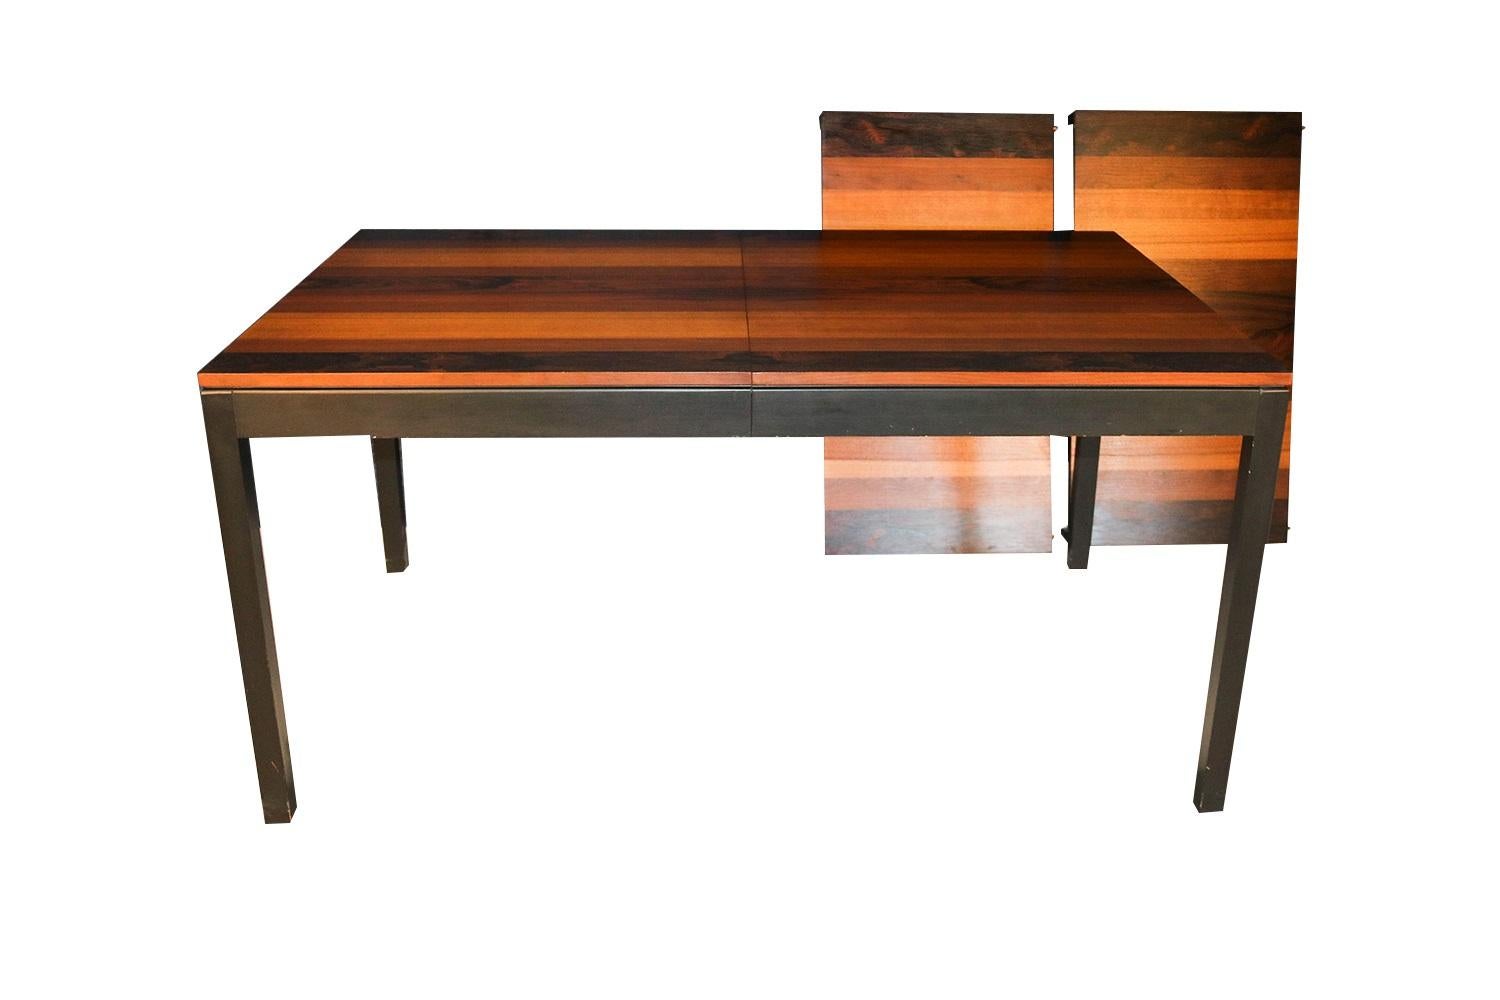 Blackened Midcentury Expandable Milo Baughman Dining Table for Directional For Sale